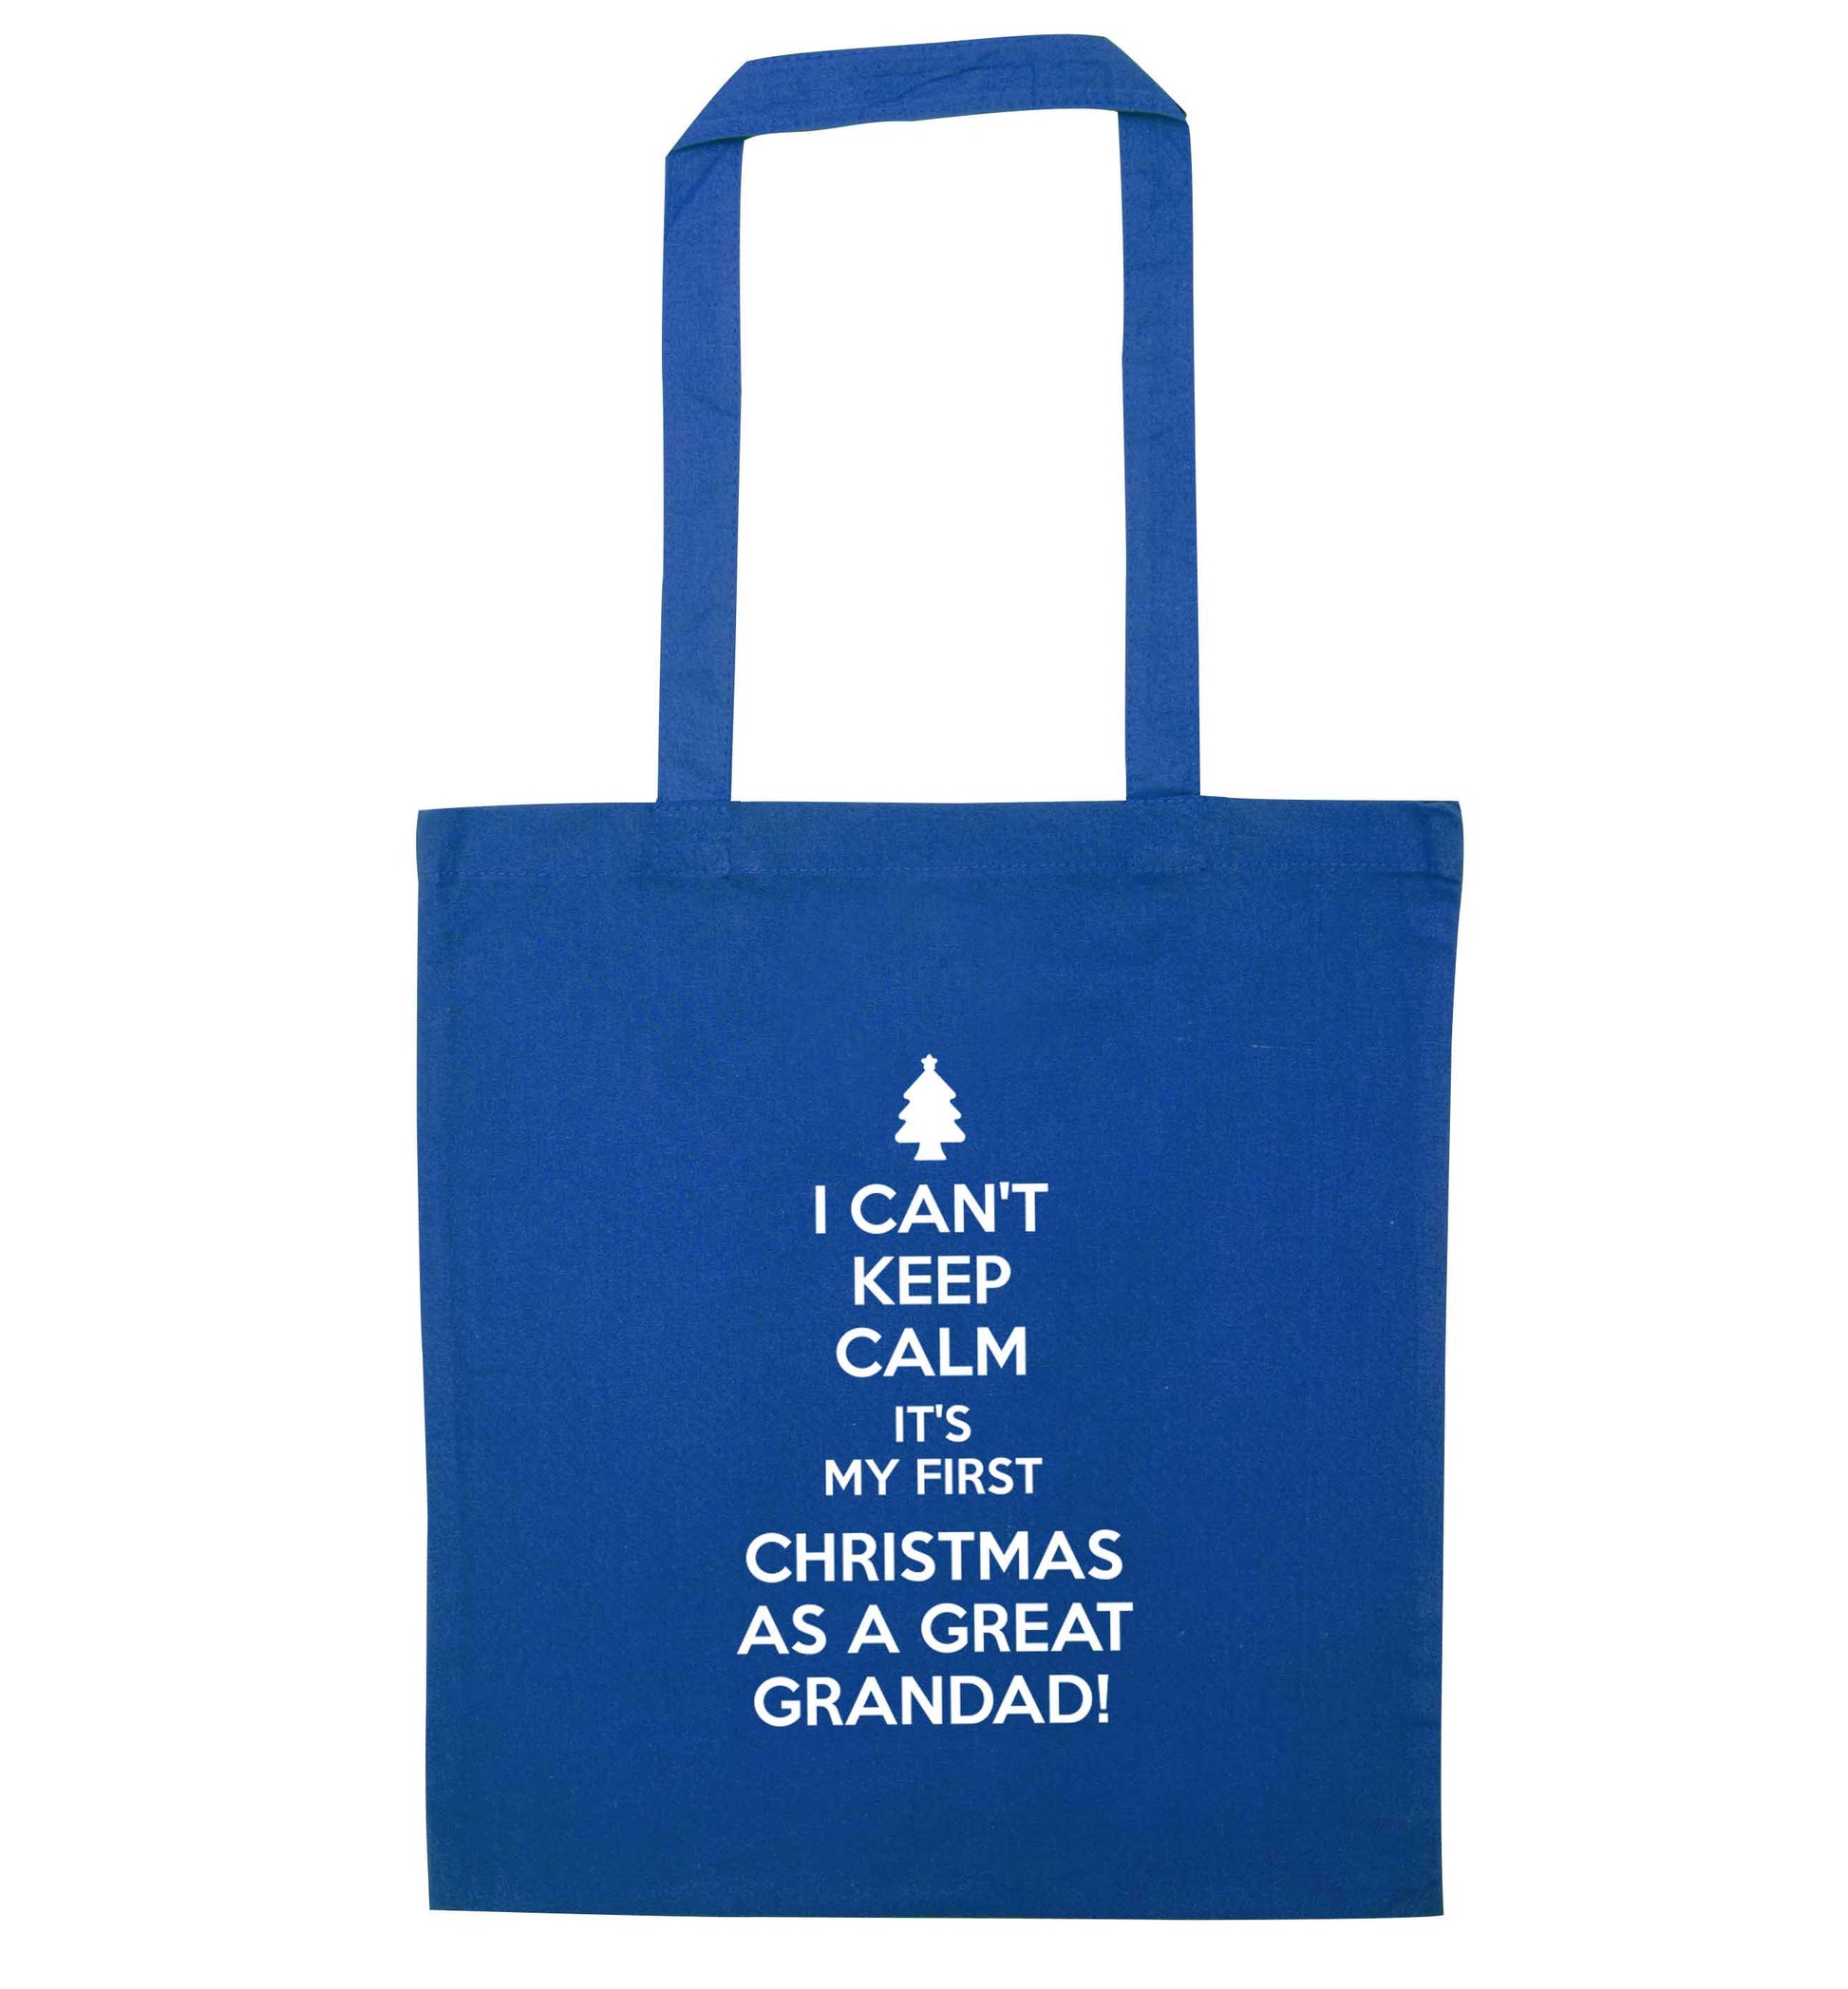 I can't keep calm it's my first Christmas as a great grandad! blue tote bag